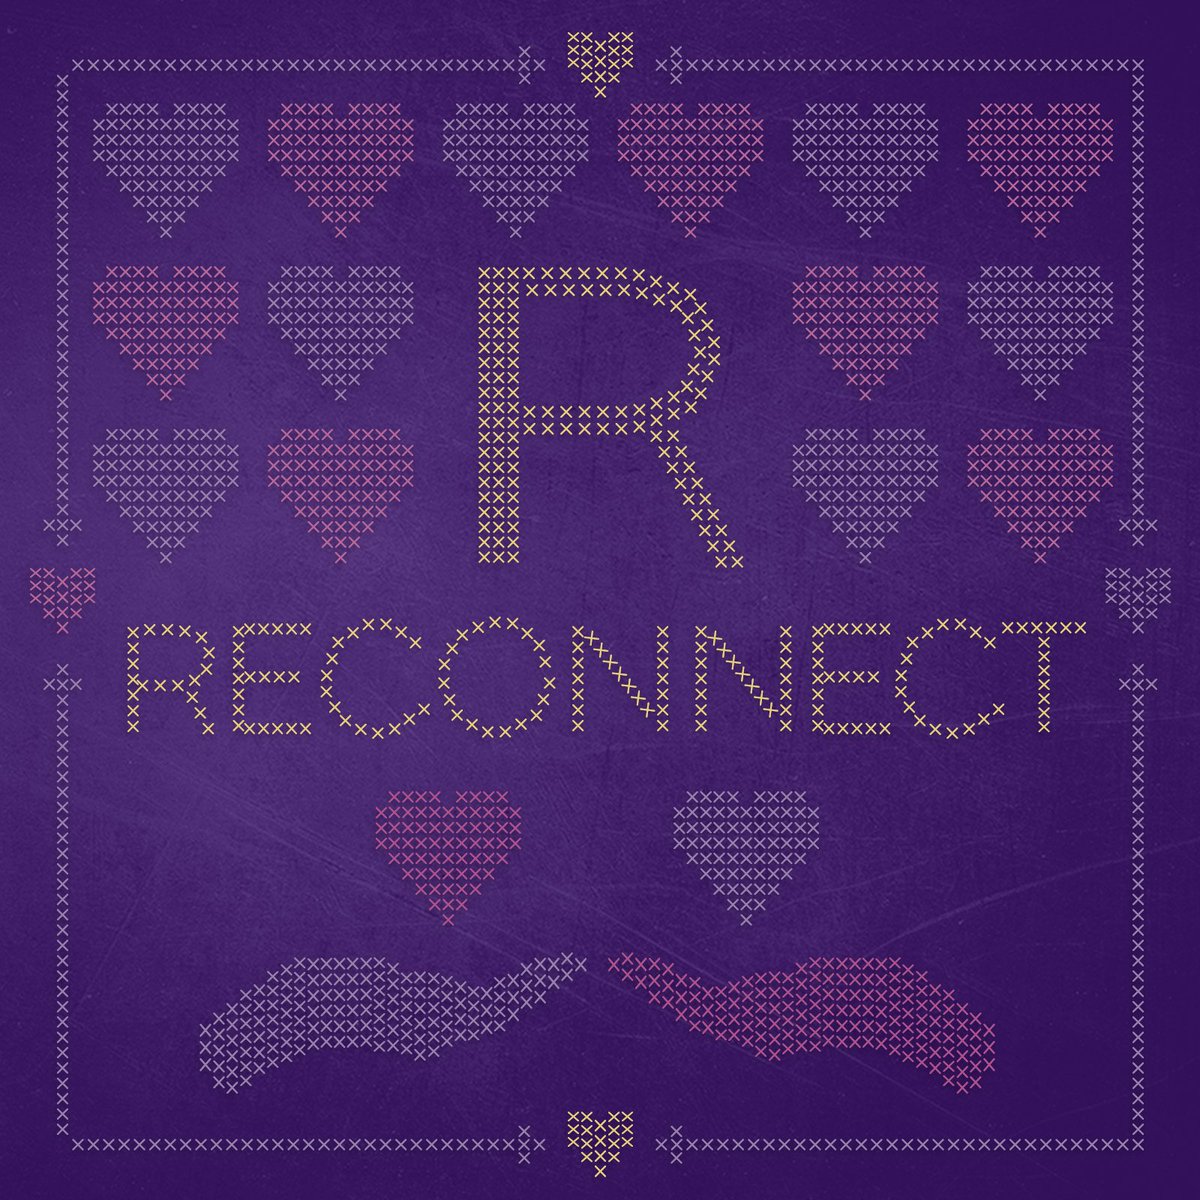 RECONNECT & RESOURCES: Offer to follow up on the conversation and share resources (articles, videos, podcasts, etc.) for them to review at their own pace.